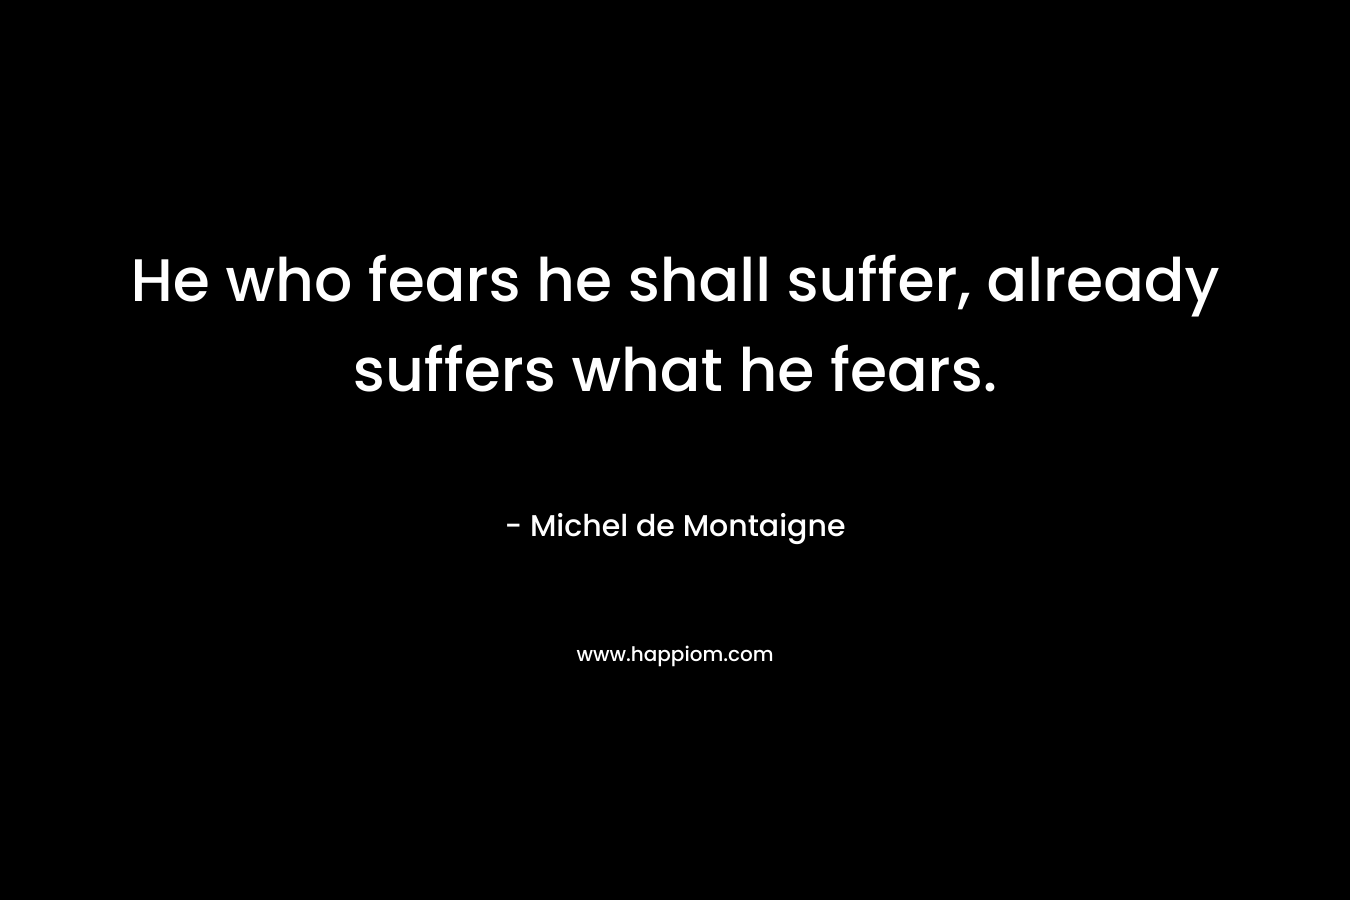 He who fears he shall suffer, already suffers what he fears.